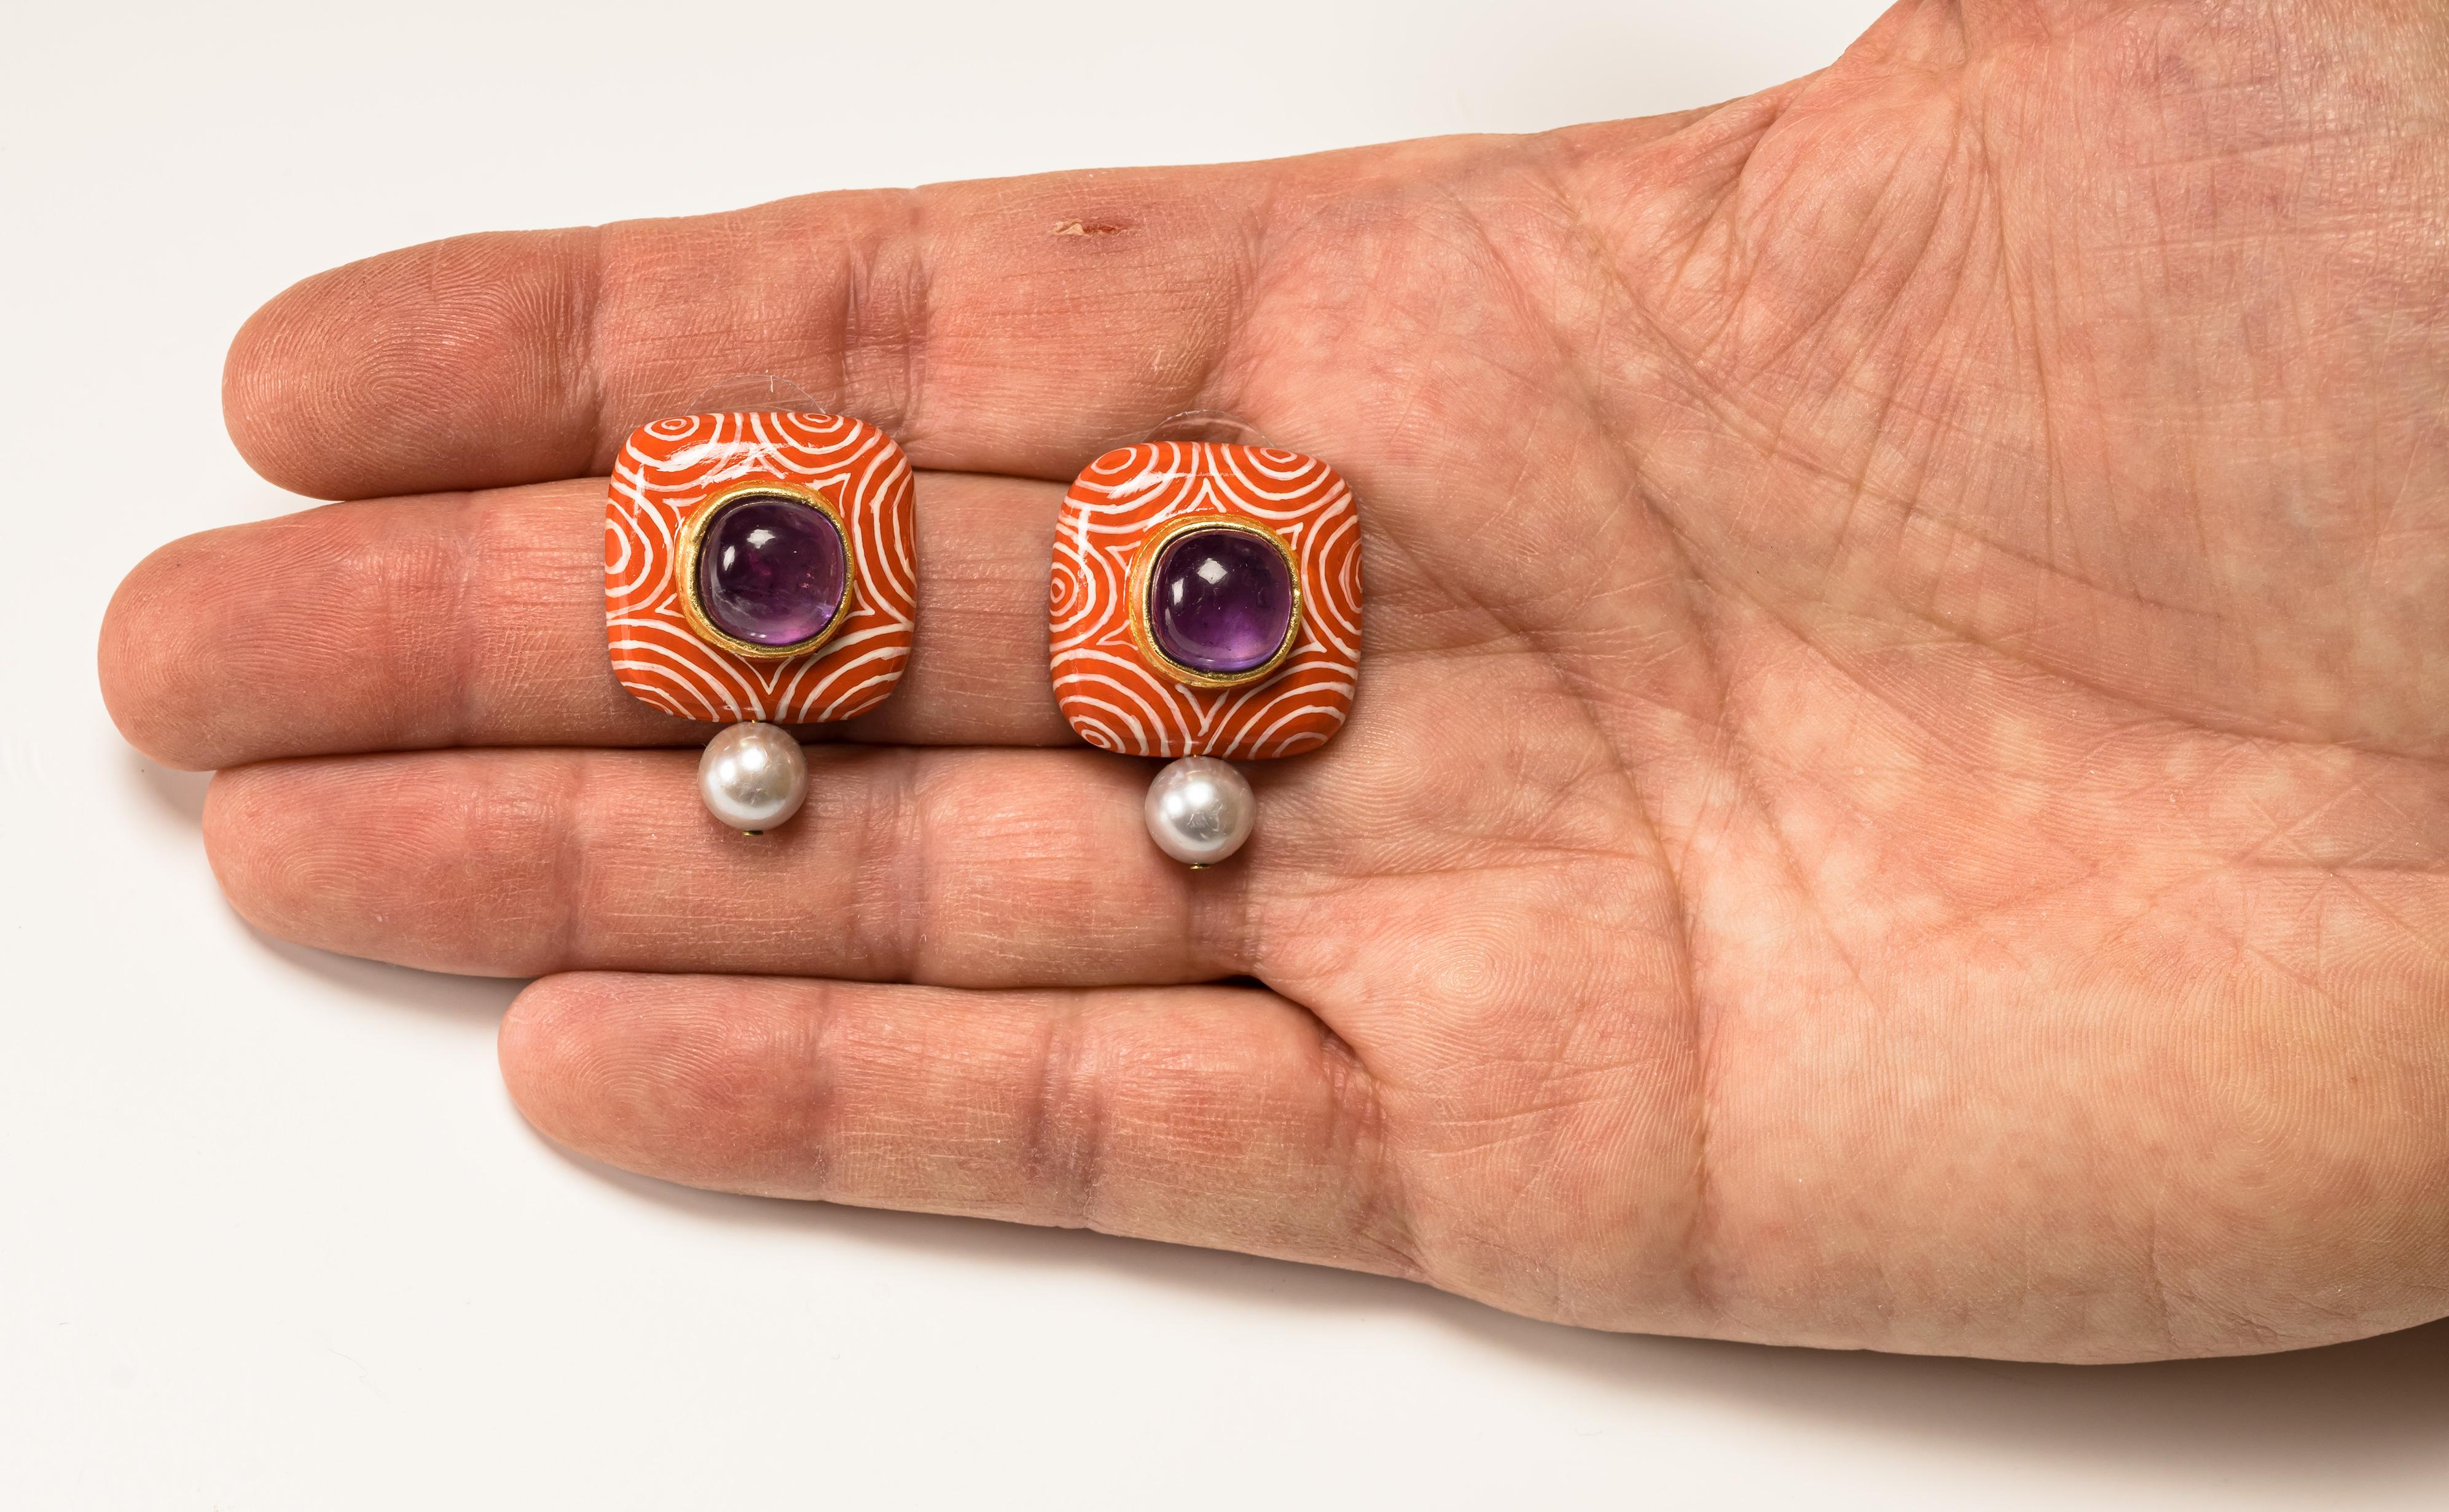 Earrings “ Hypno 3”, 2020, are a limited edition contemporary author jewelry by italian artist Gian Luca Bartellone.
Materials: papier-mâché, silver, amethysts, pearls, gold leaf 22kt.

The main body is made of papier-mâché and hand painted with